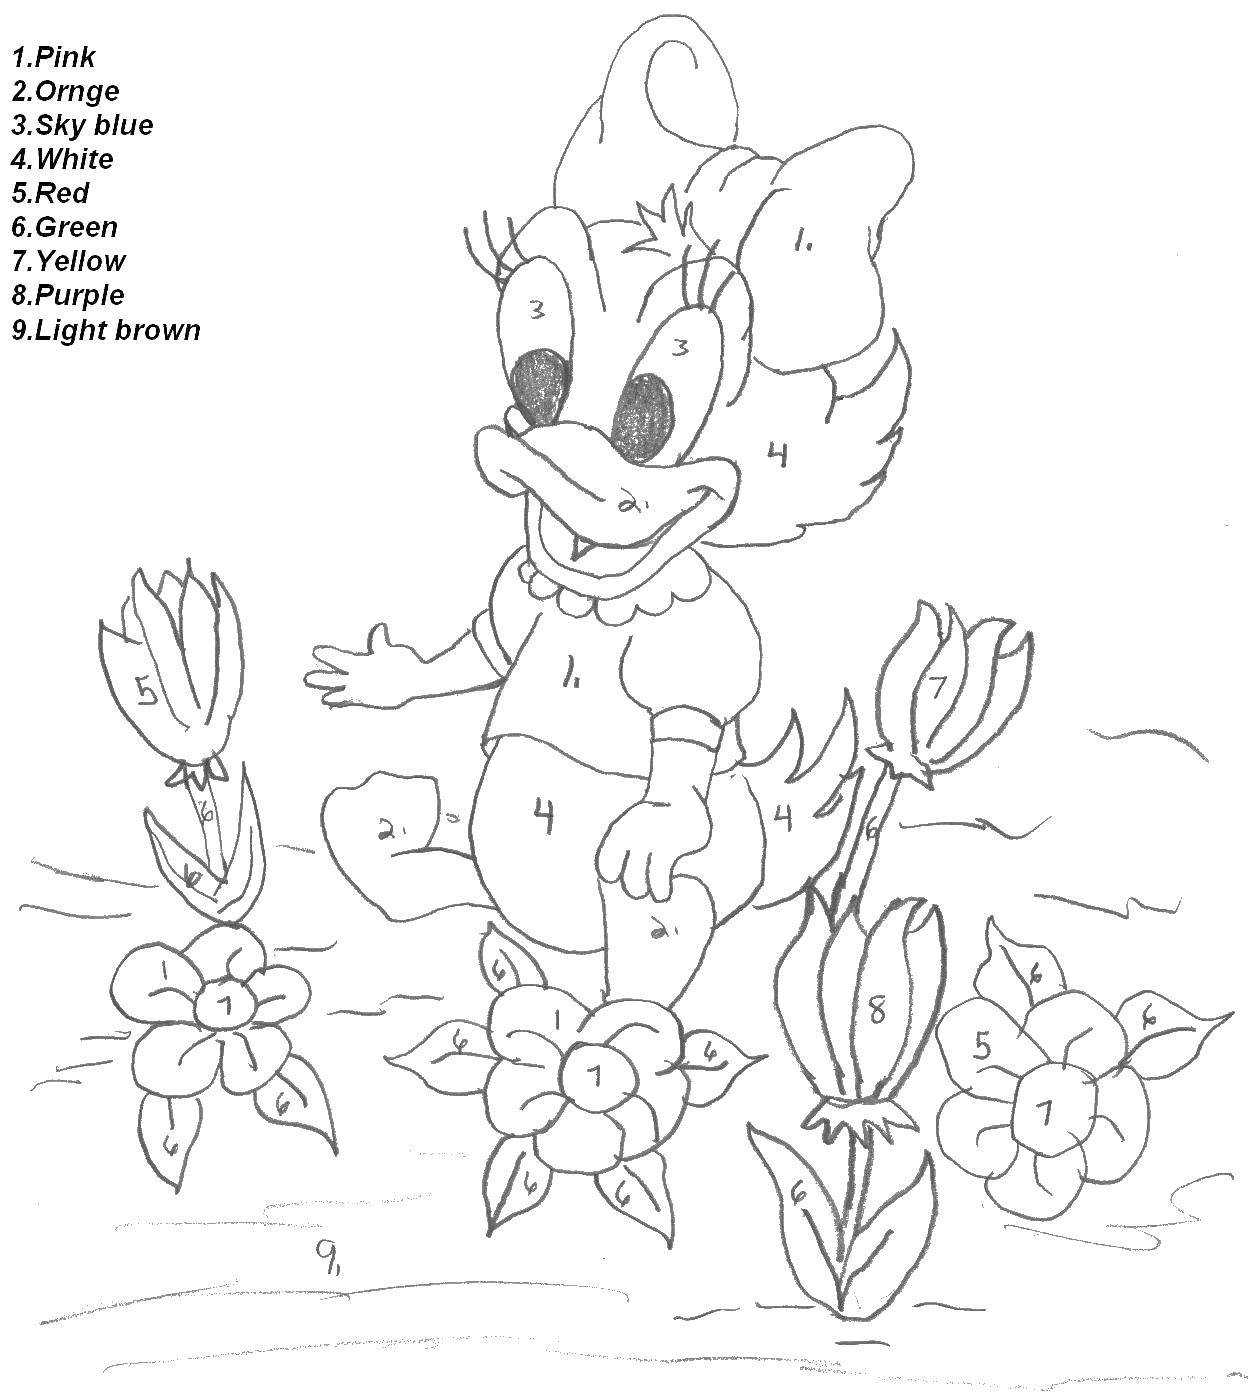 Coloring Flowers and duck. Category That number. Tags:  duckling, flowers, bowknot.